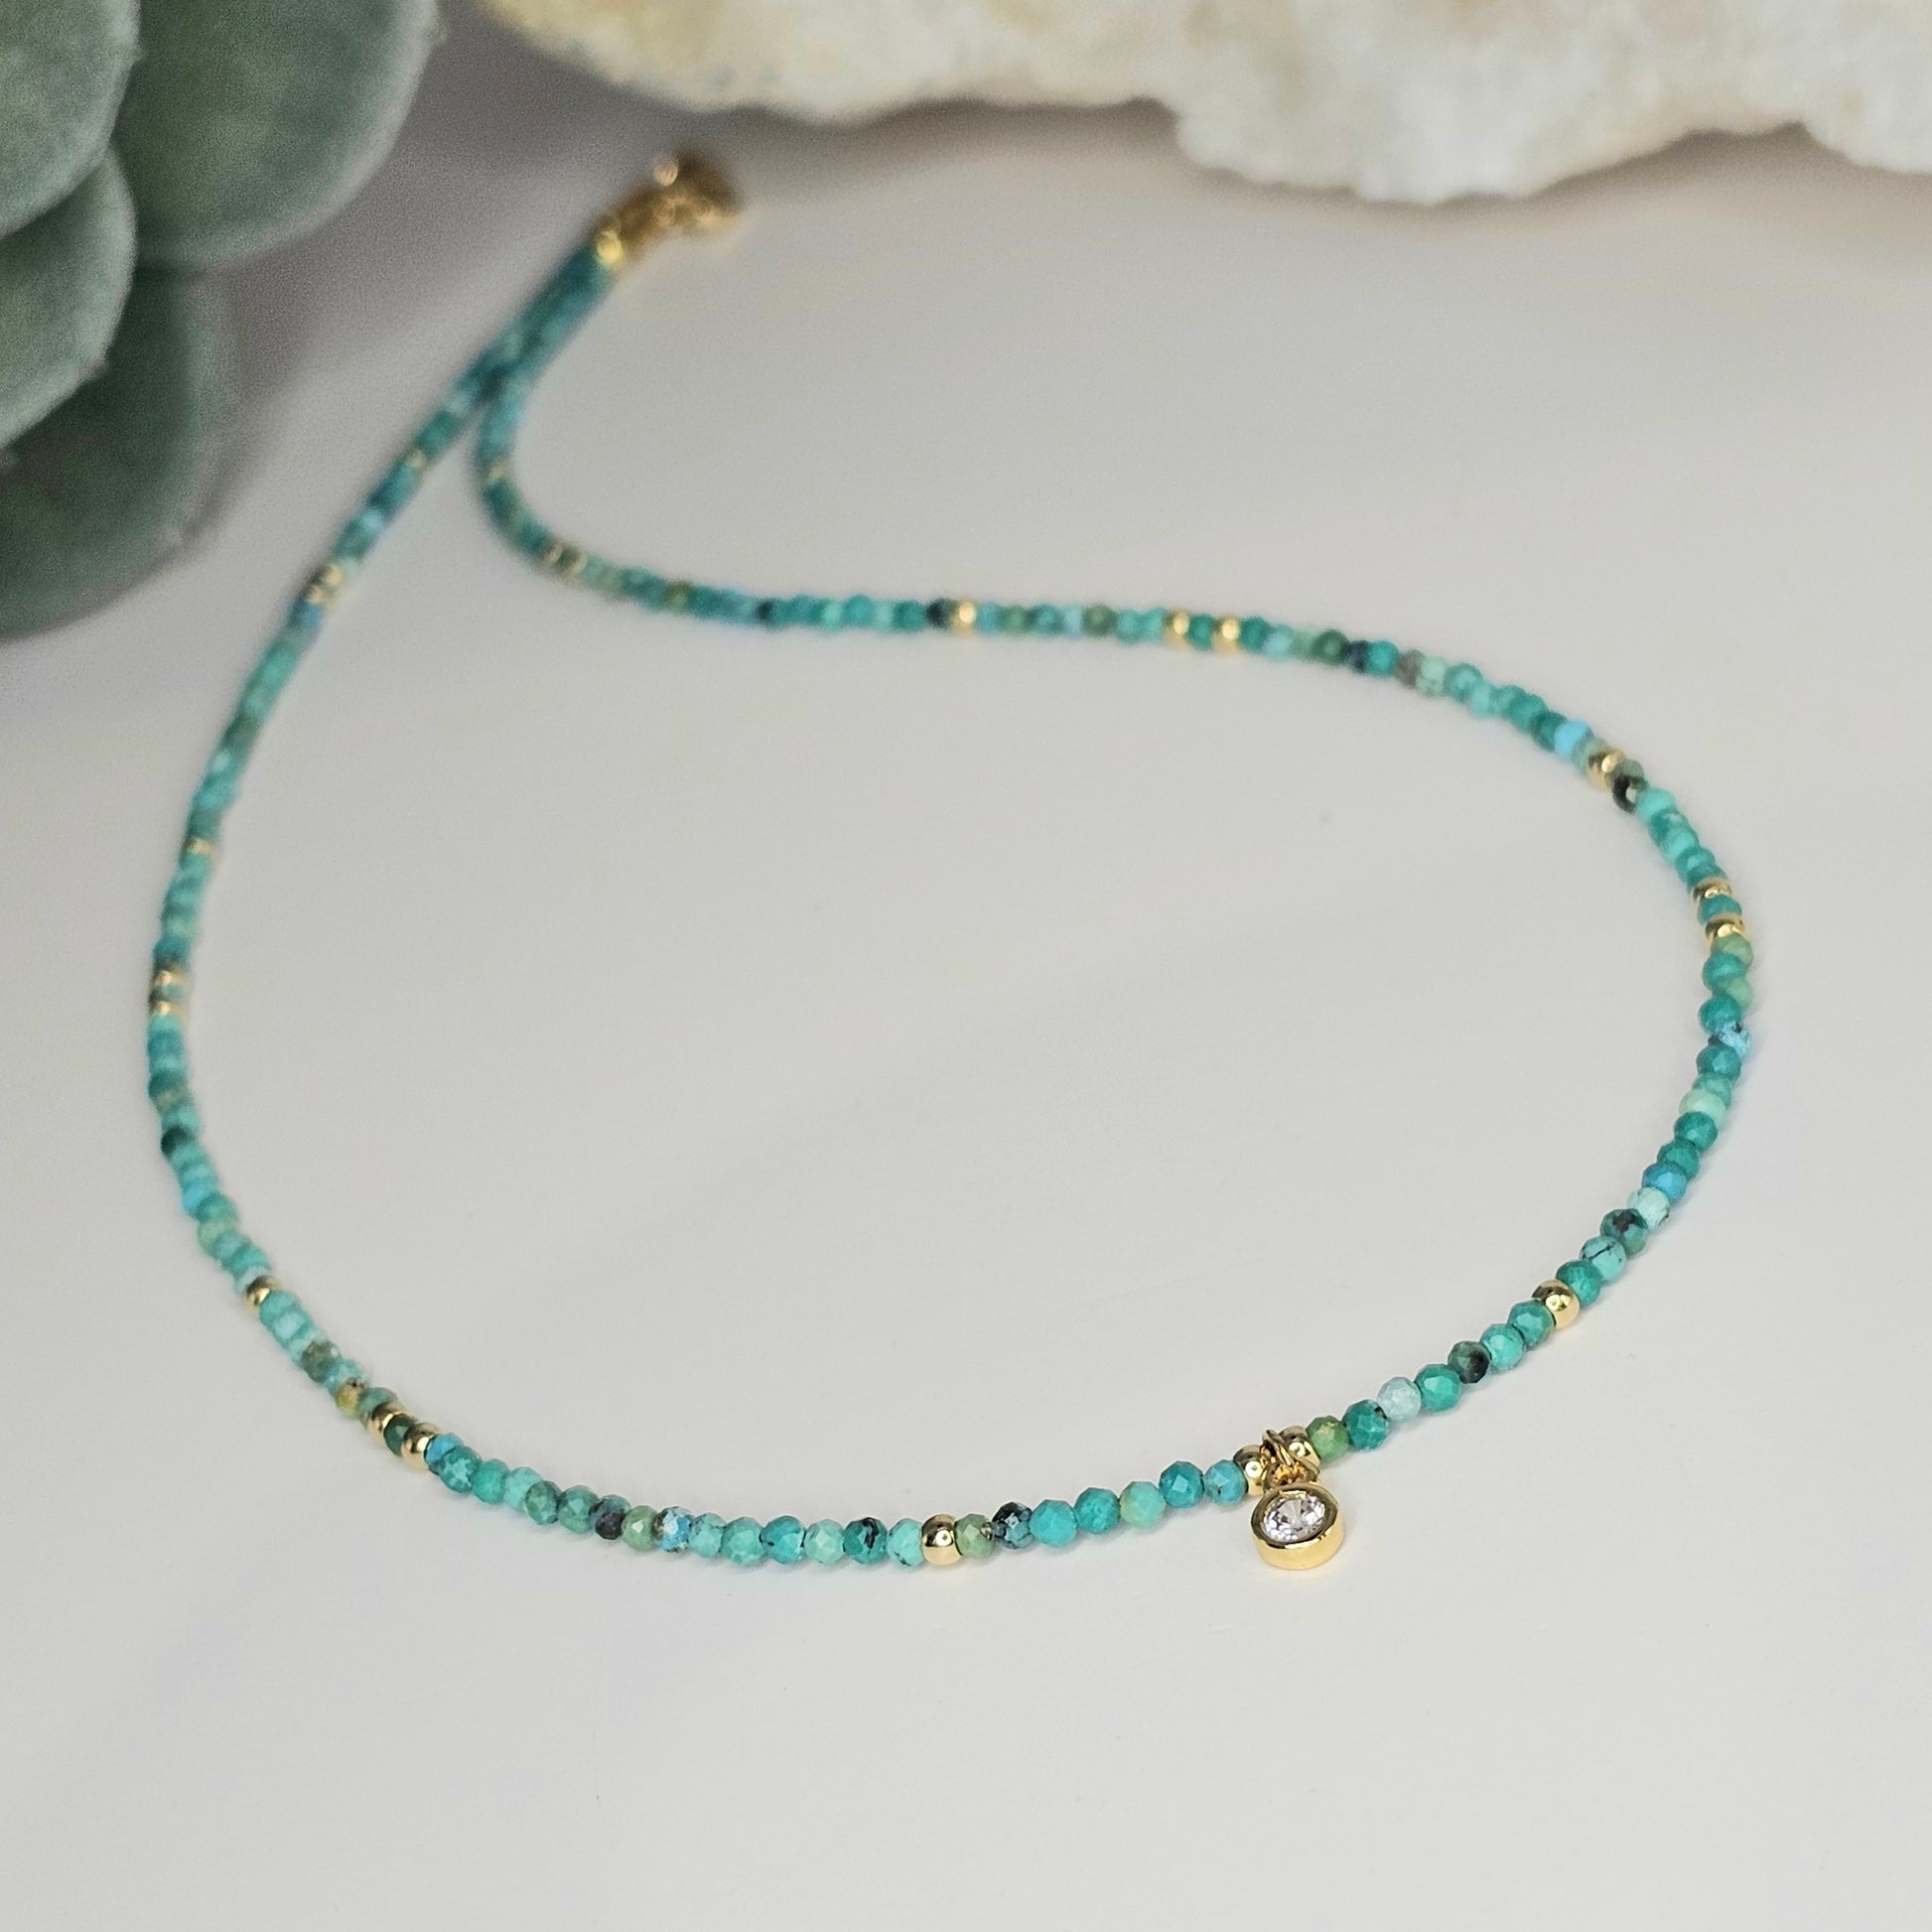 Delicate, faceted Turquoise bead necklace with an AAA grade CZ pendant and gold toned stainless steel clasp.